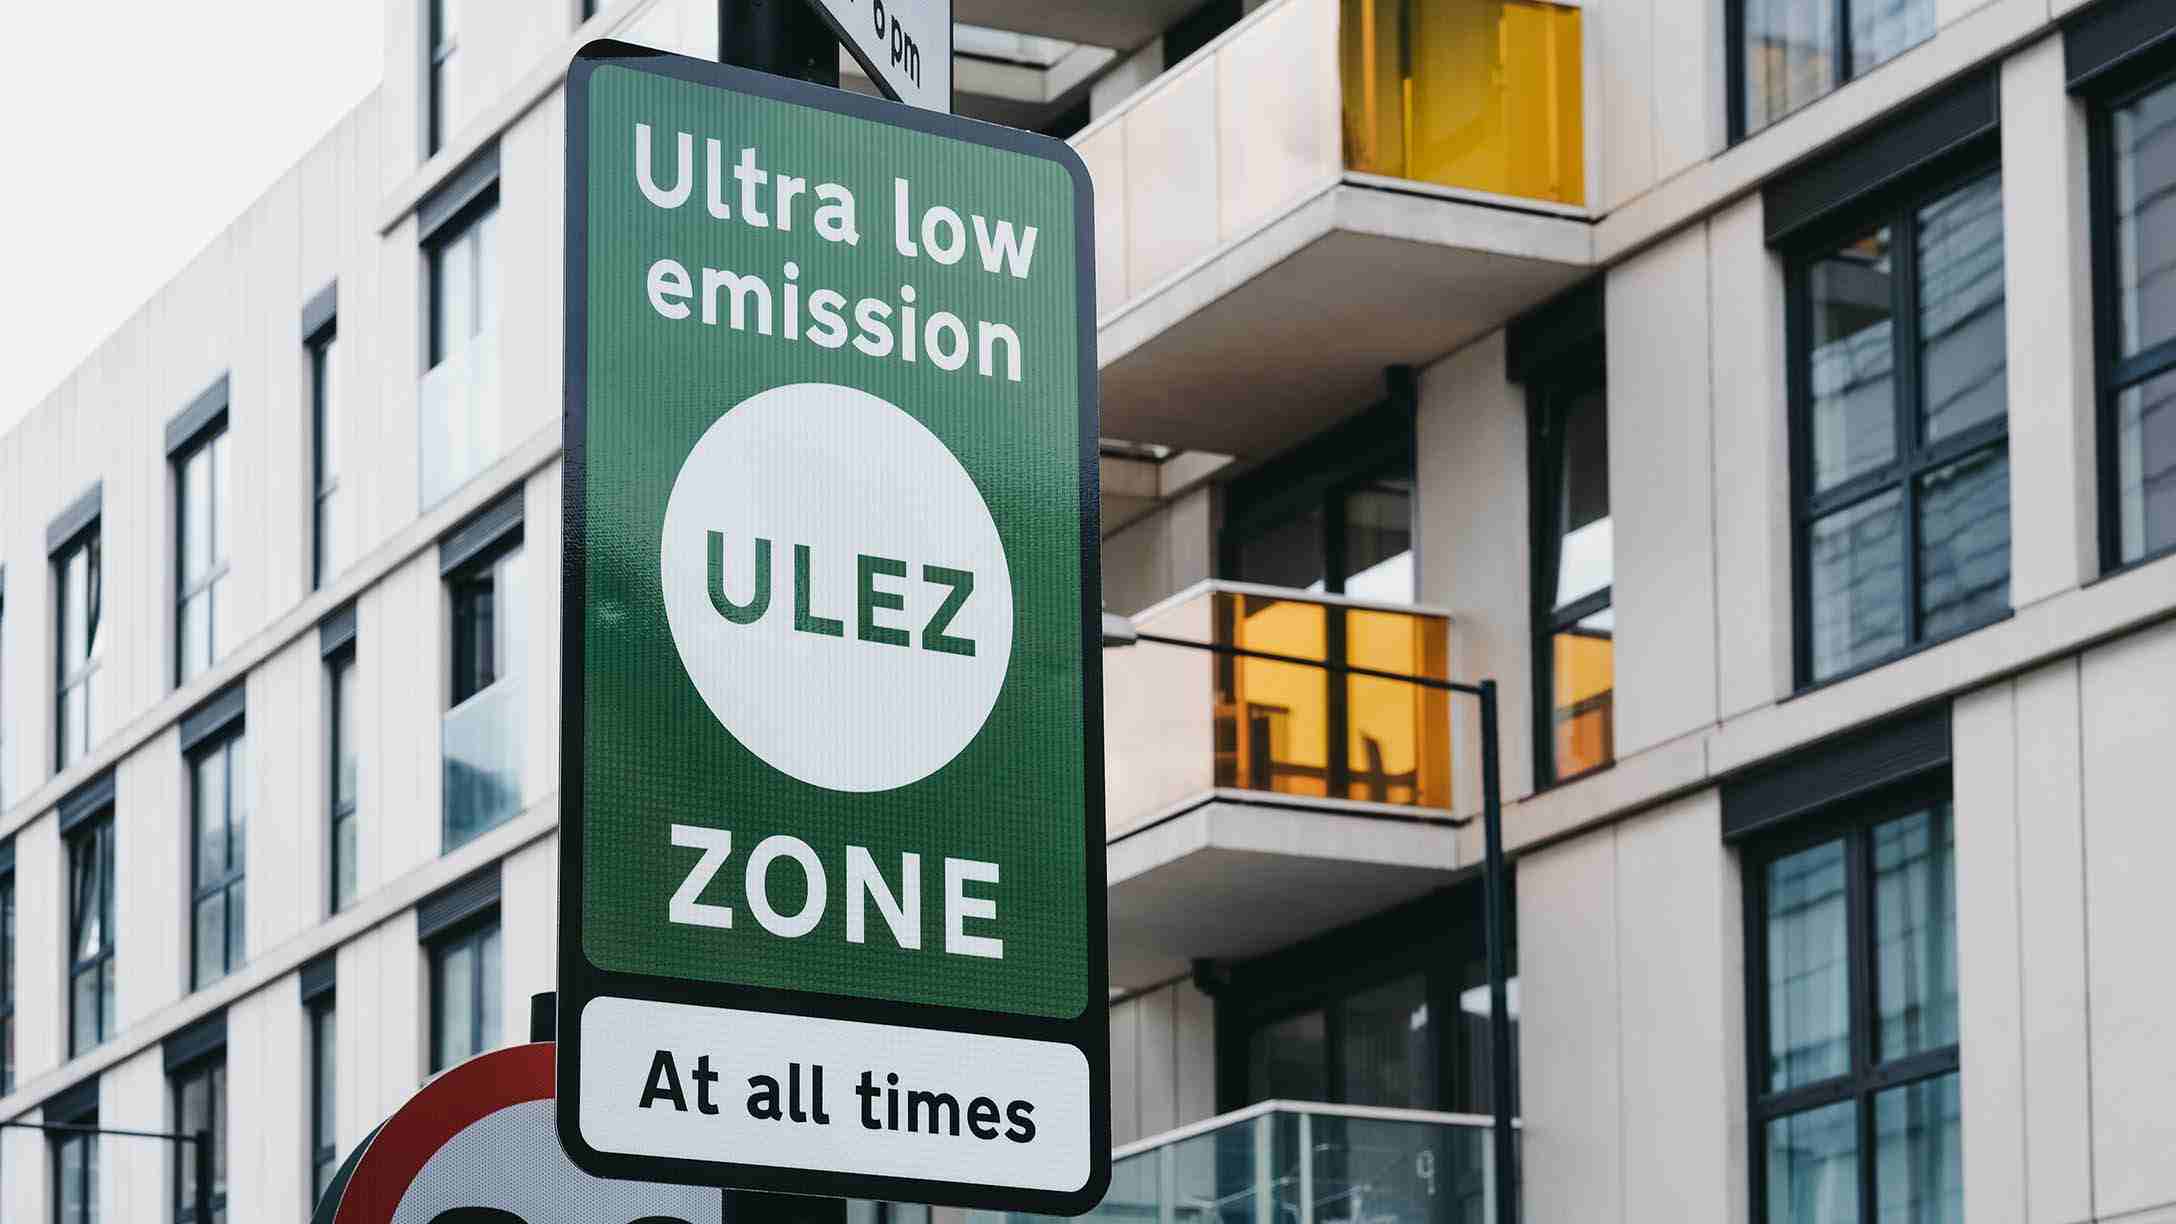 A street sign in London, England signifying that the driver is entering an ultra low emission zone and that it is enforced at all times.